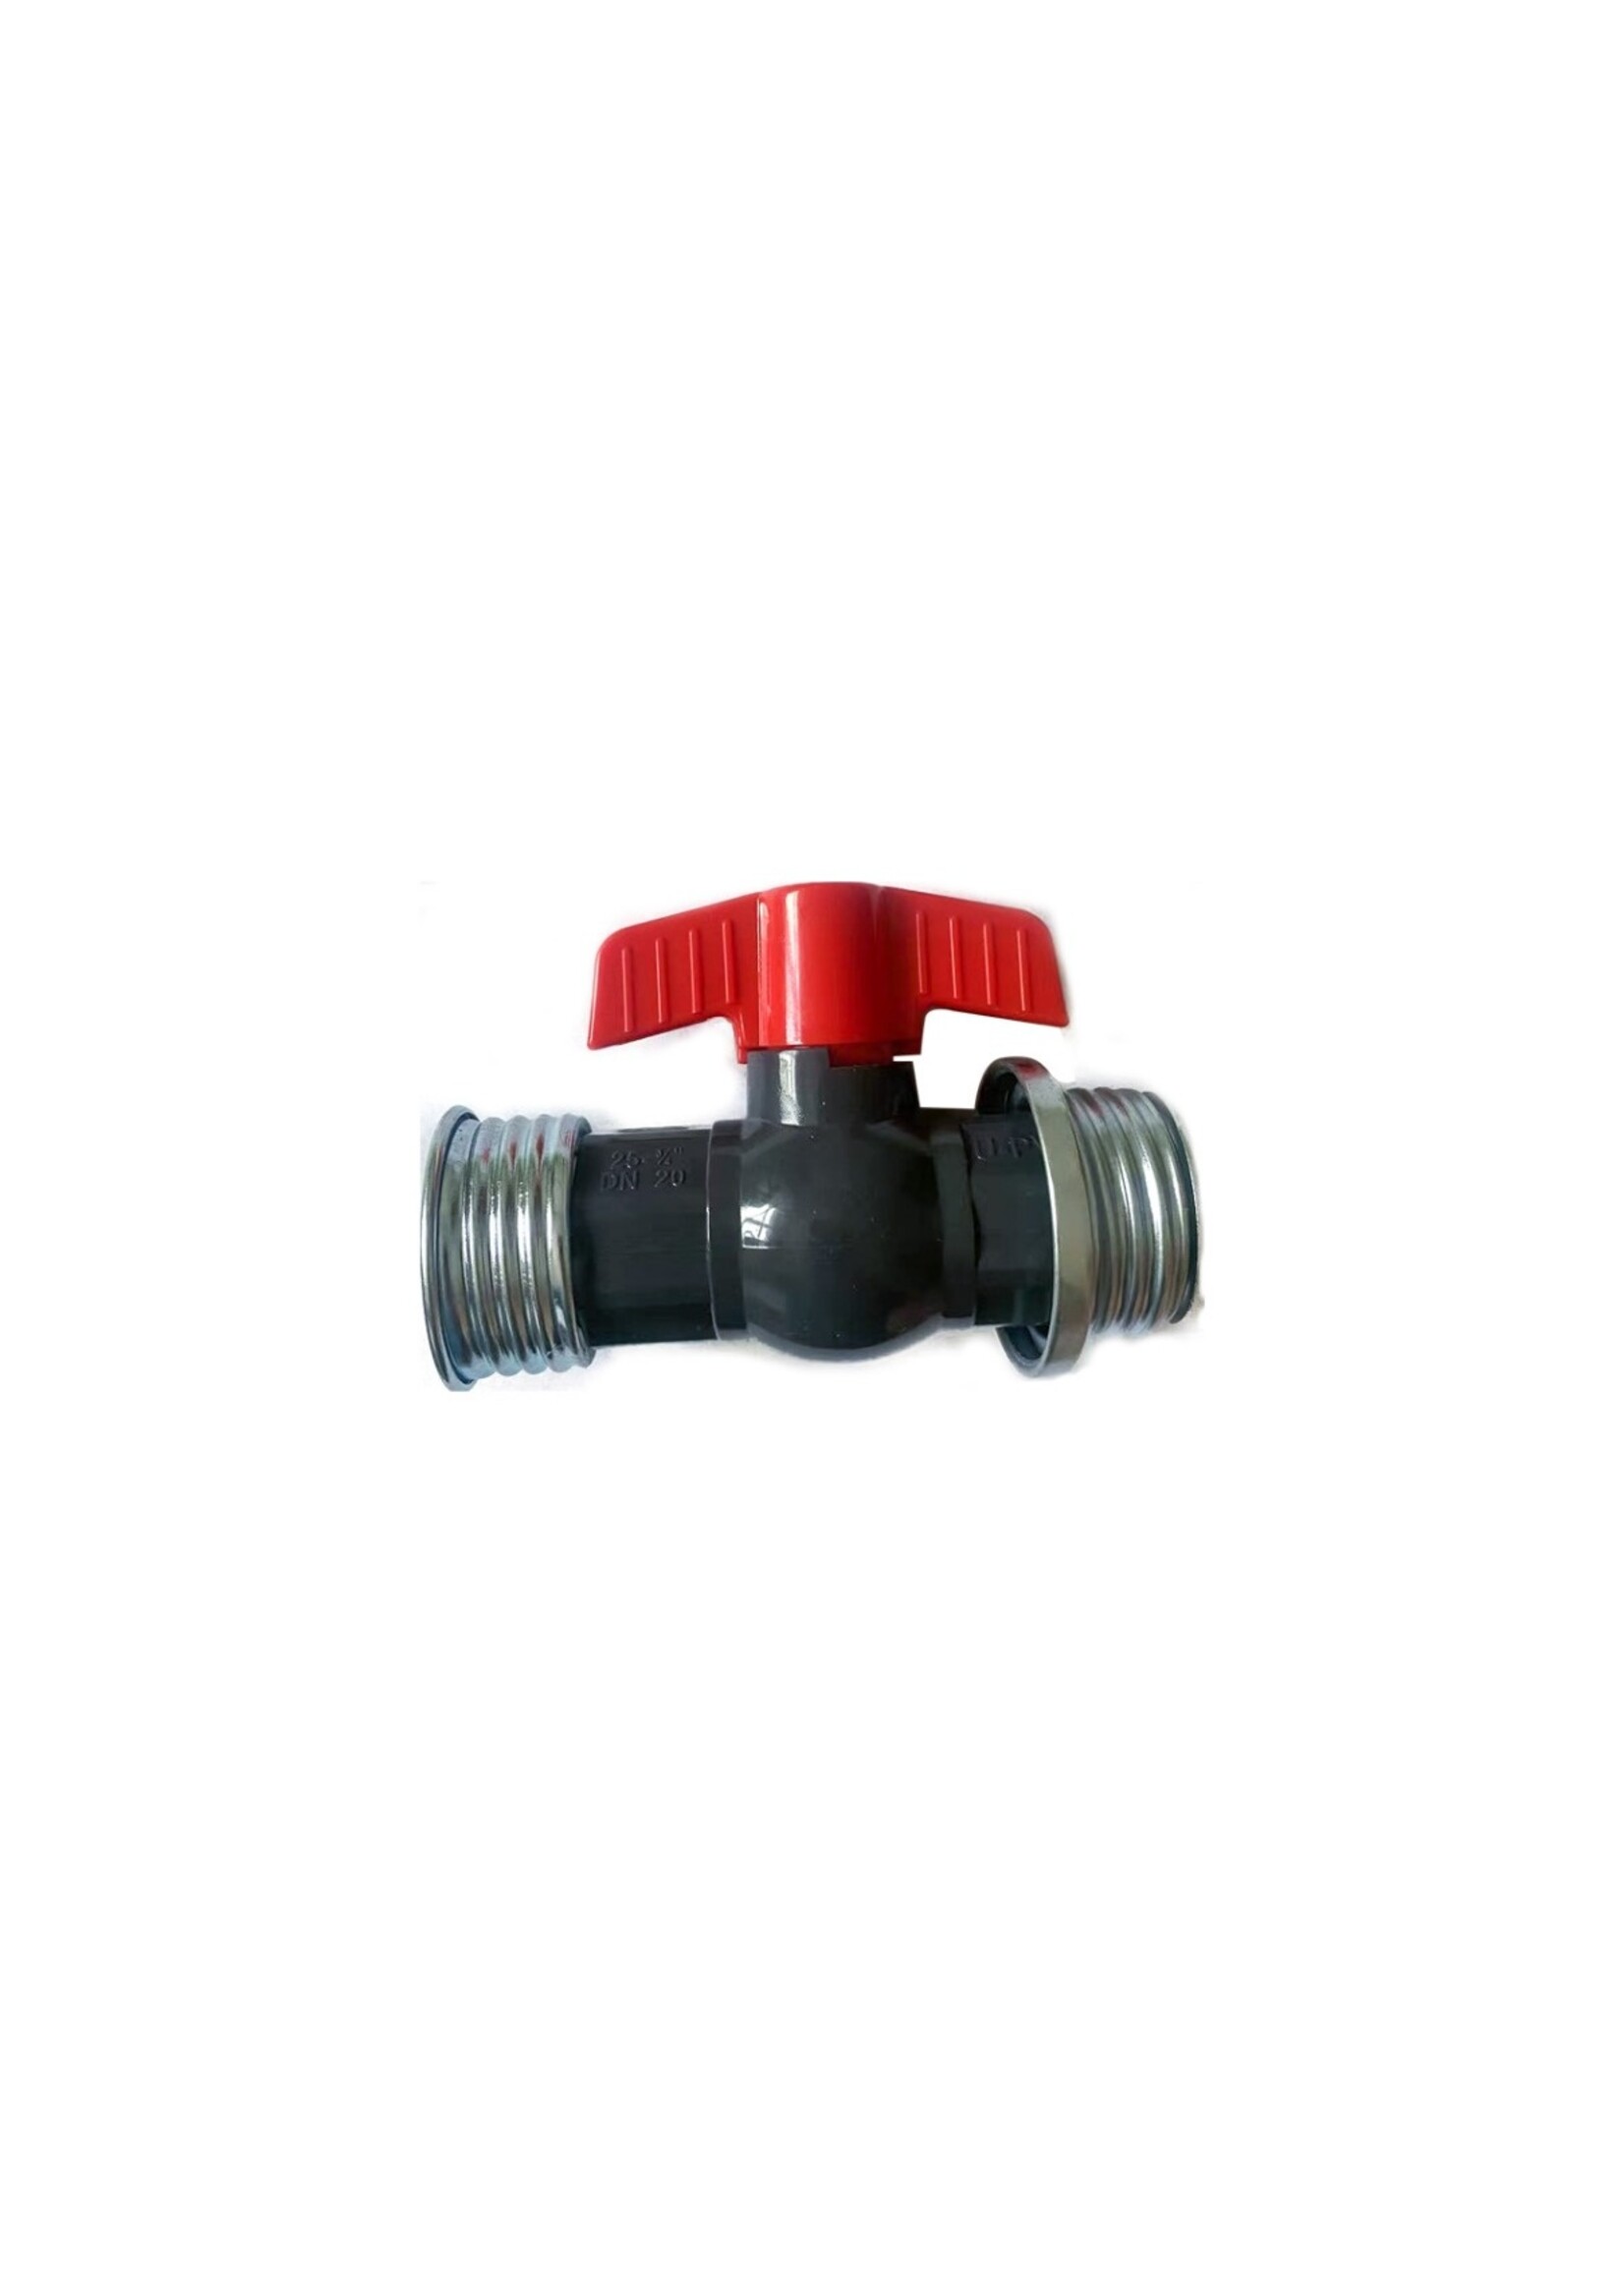 MOI Gas mask hose connector with valve